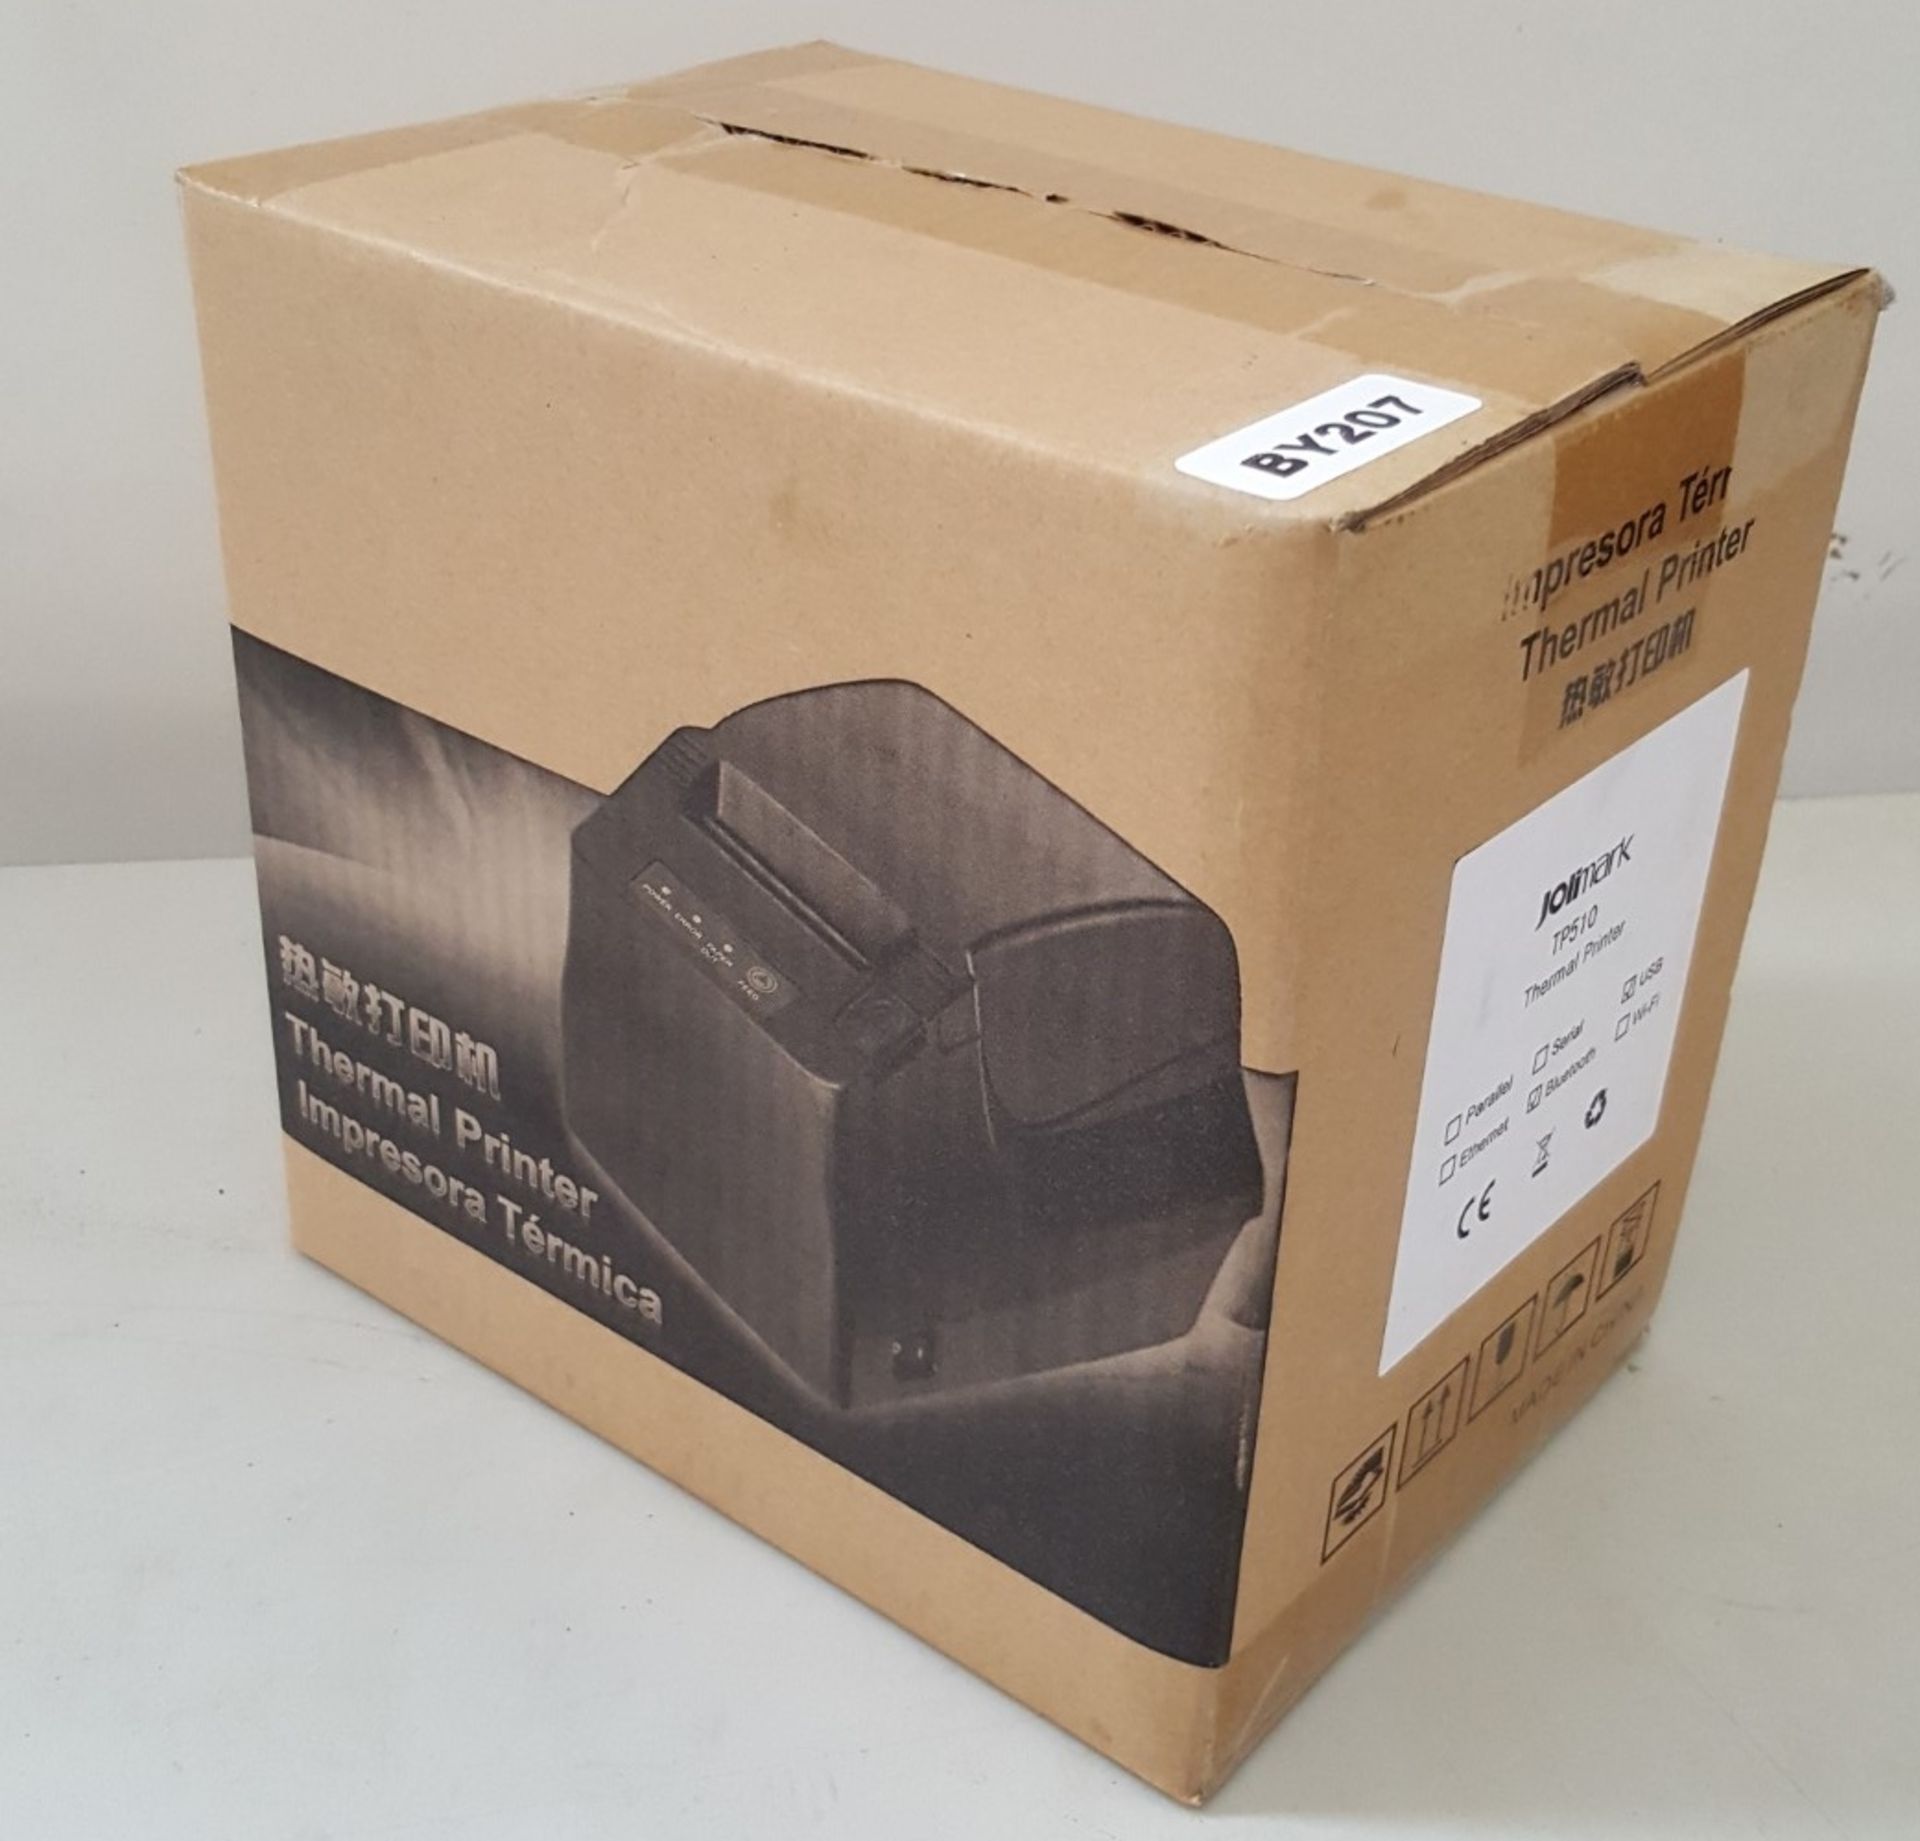 1 x NEW Jolimark TP510 Thermal Printer With Bluetooth & USB interface - Ref BY207